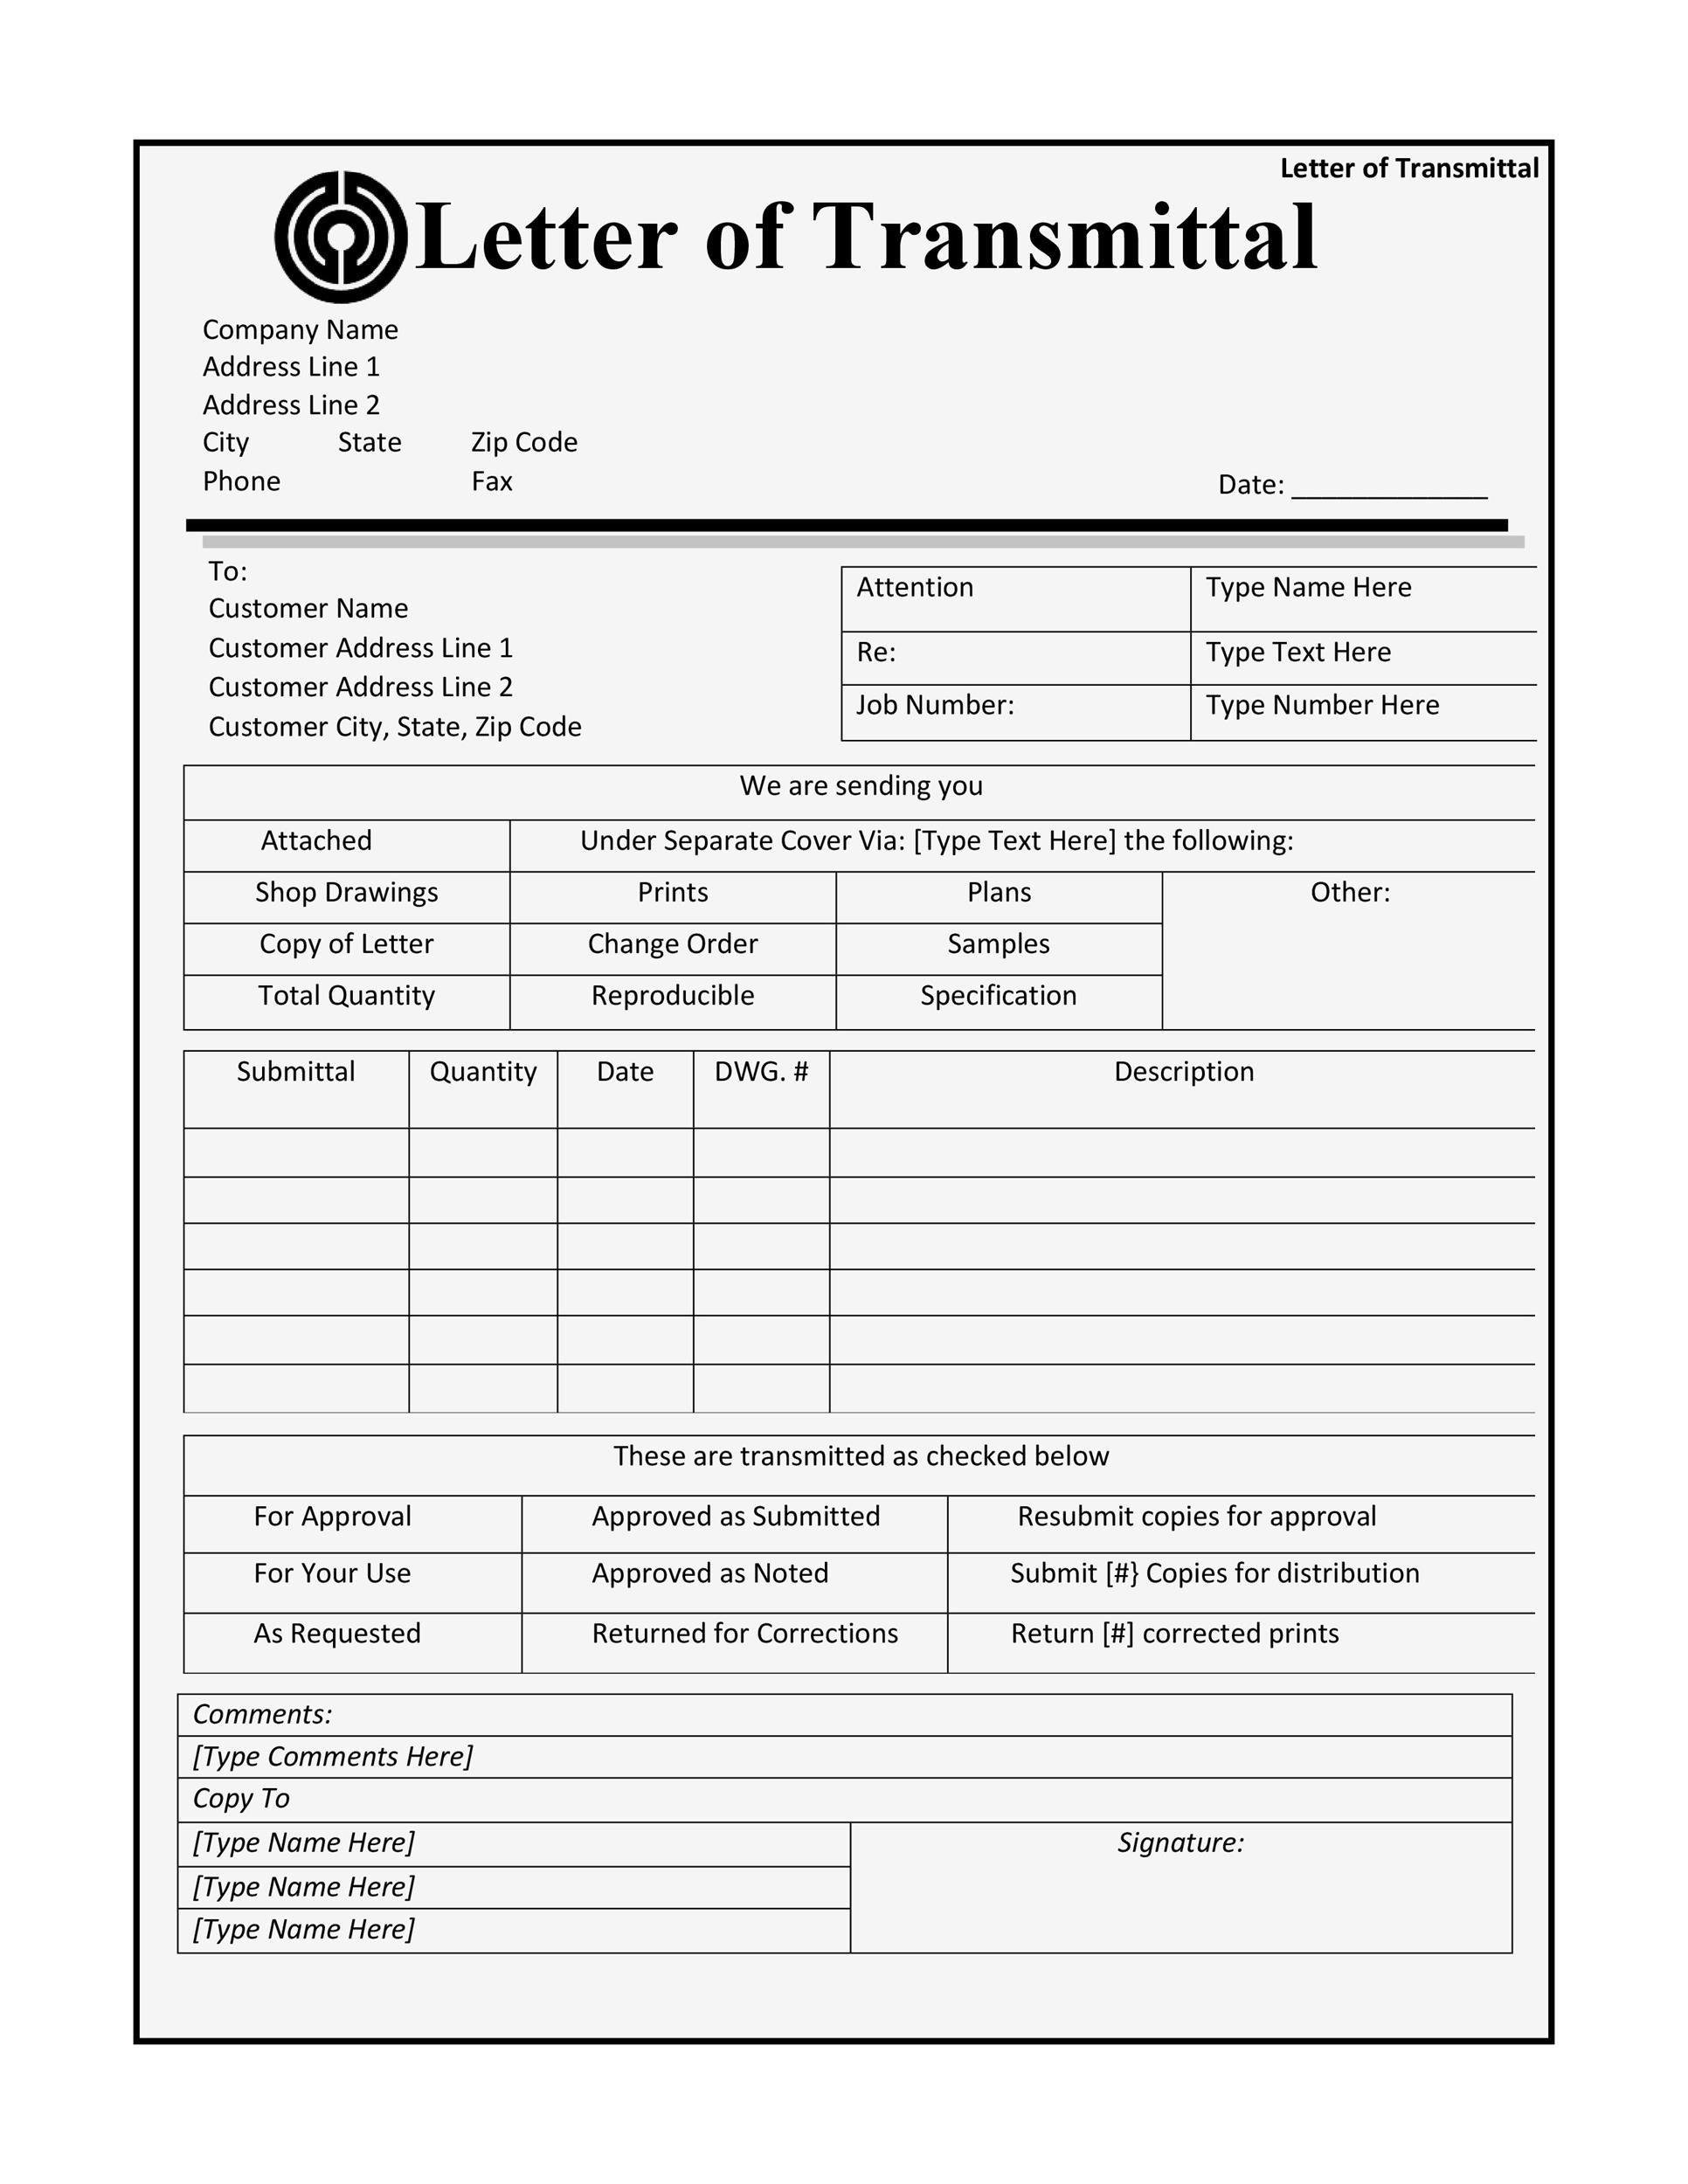 Free letter of transmittal template 03